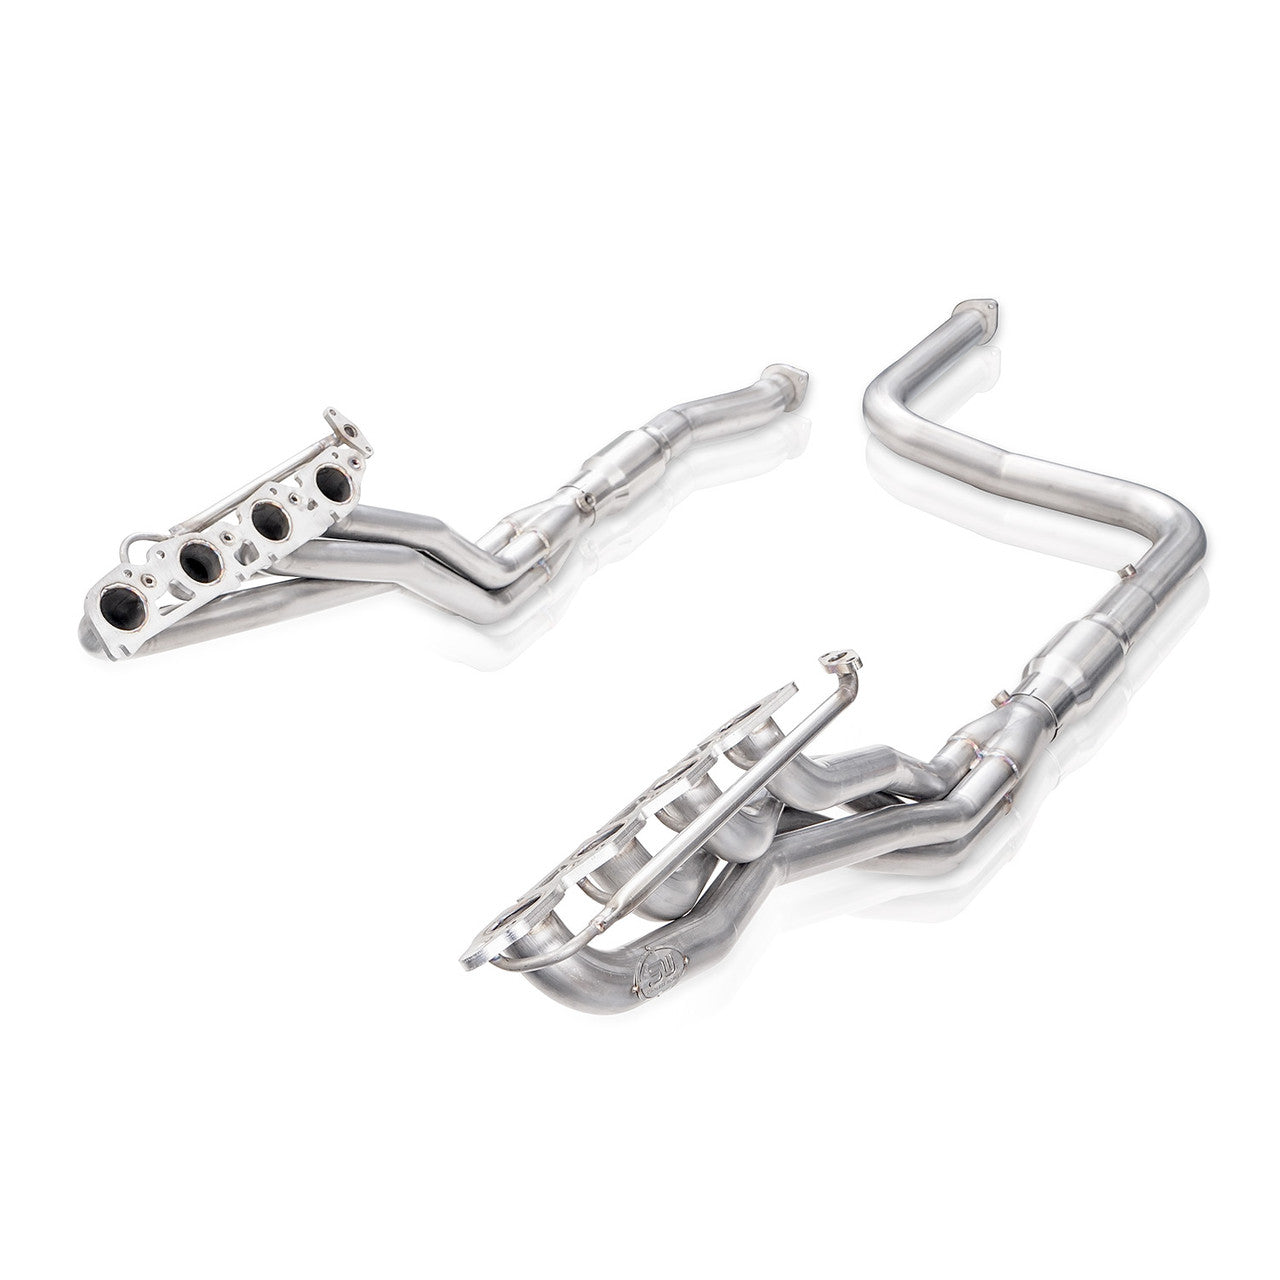 Stainless Works 2014+ Toyota Tundra 5.7L Headers 1-7/8in Primaries w/High-Flow Cats - 0